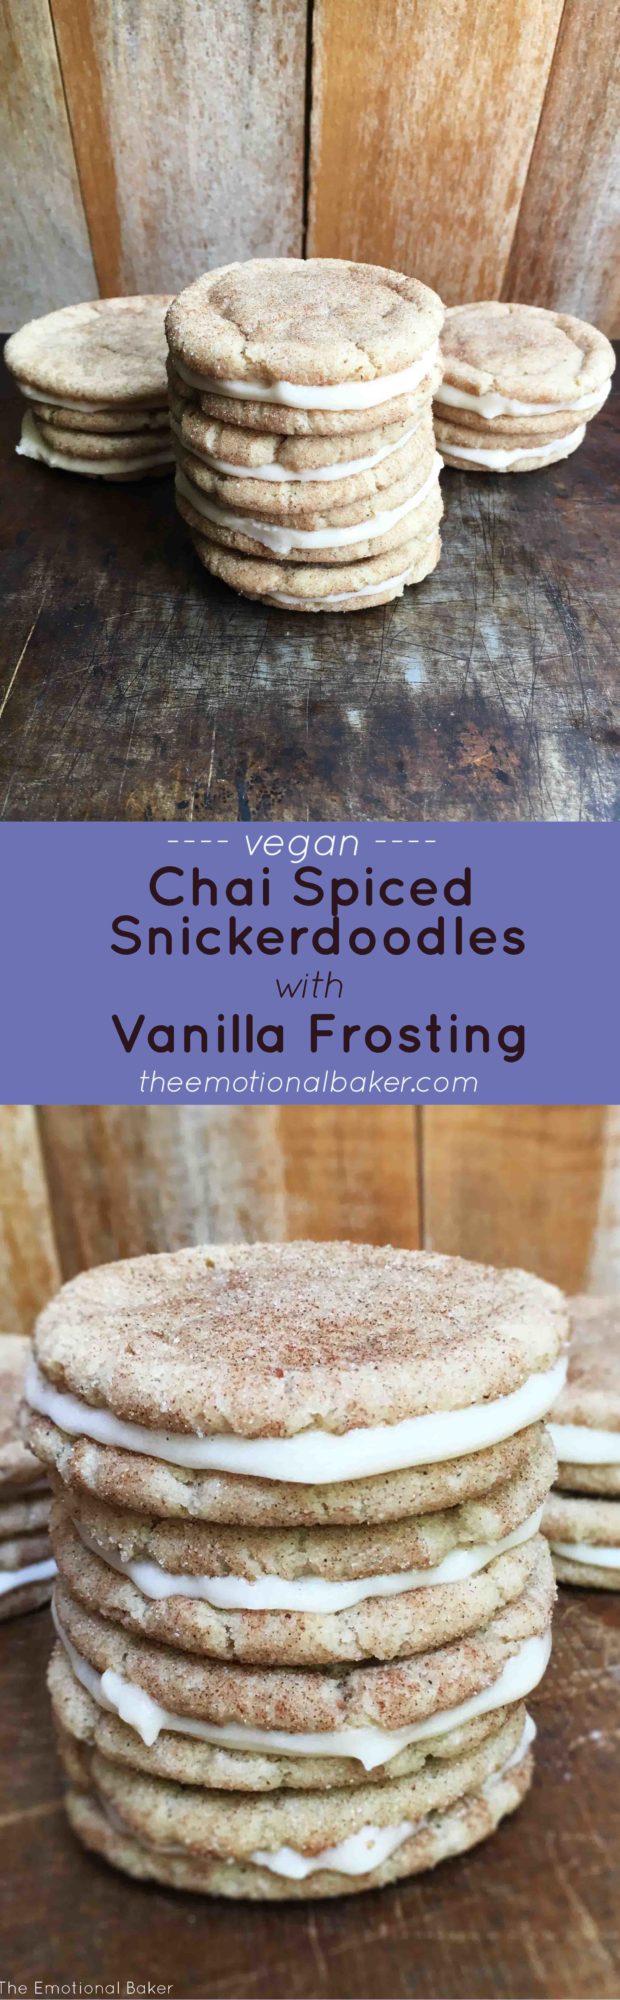 Chai Spiced Snickerdoodles with Vanilla Frosting